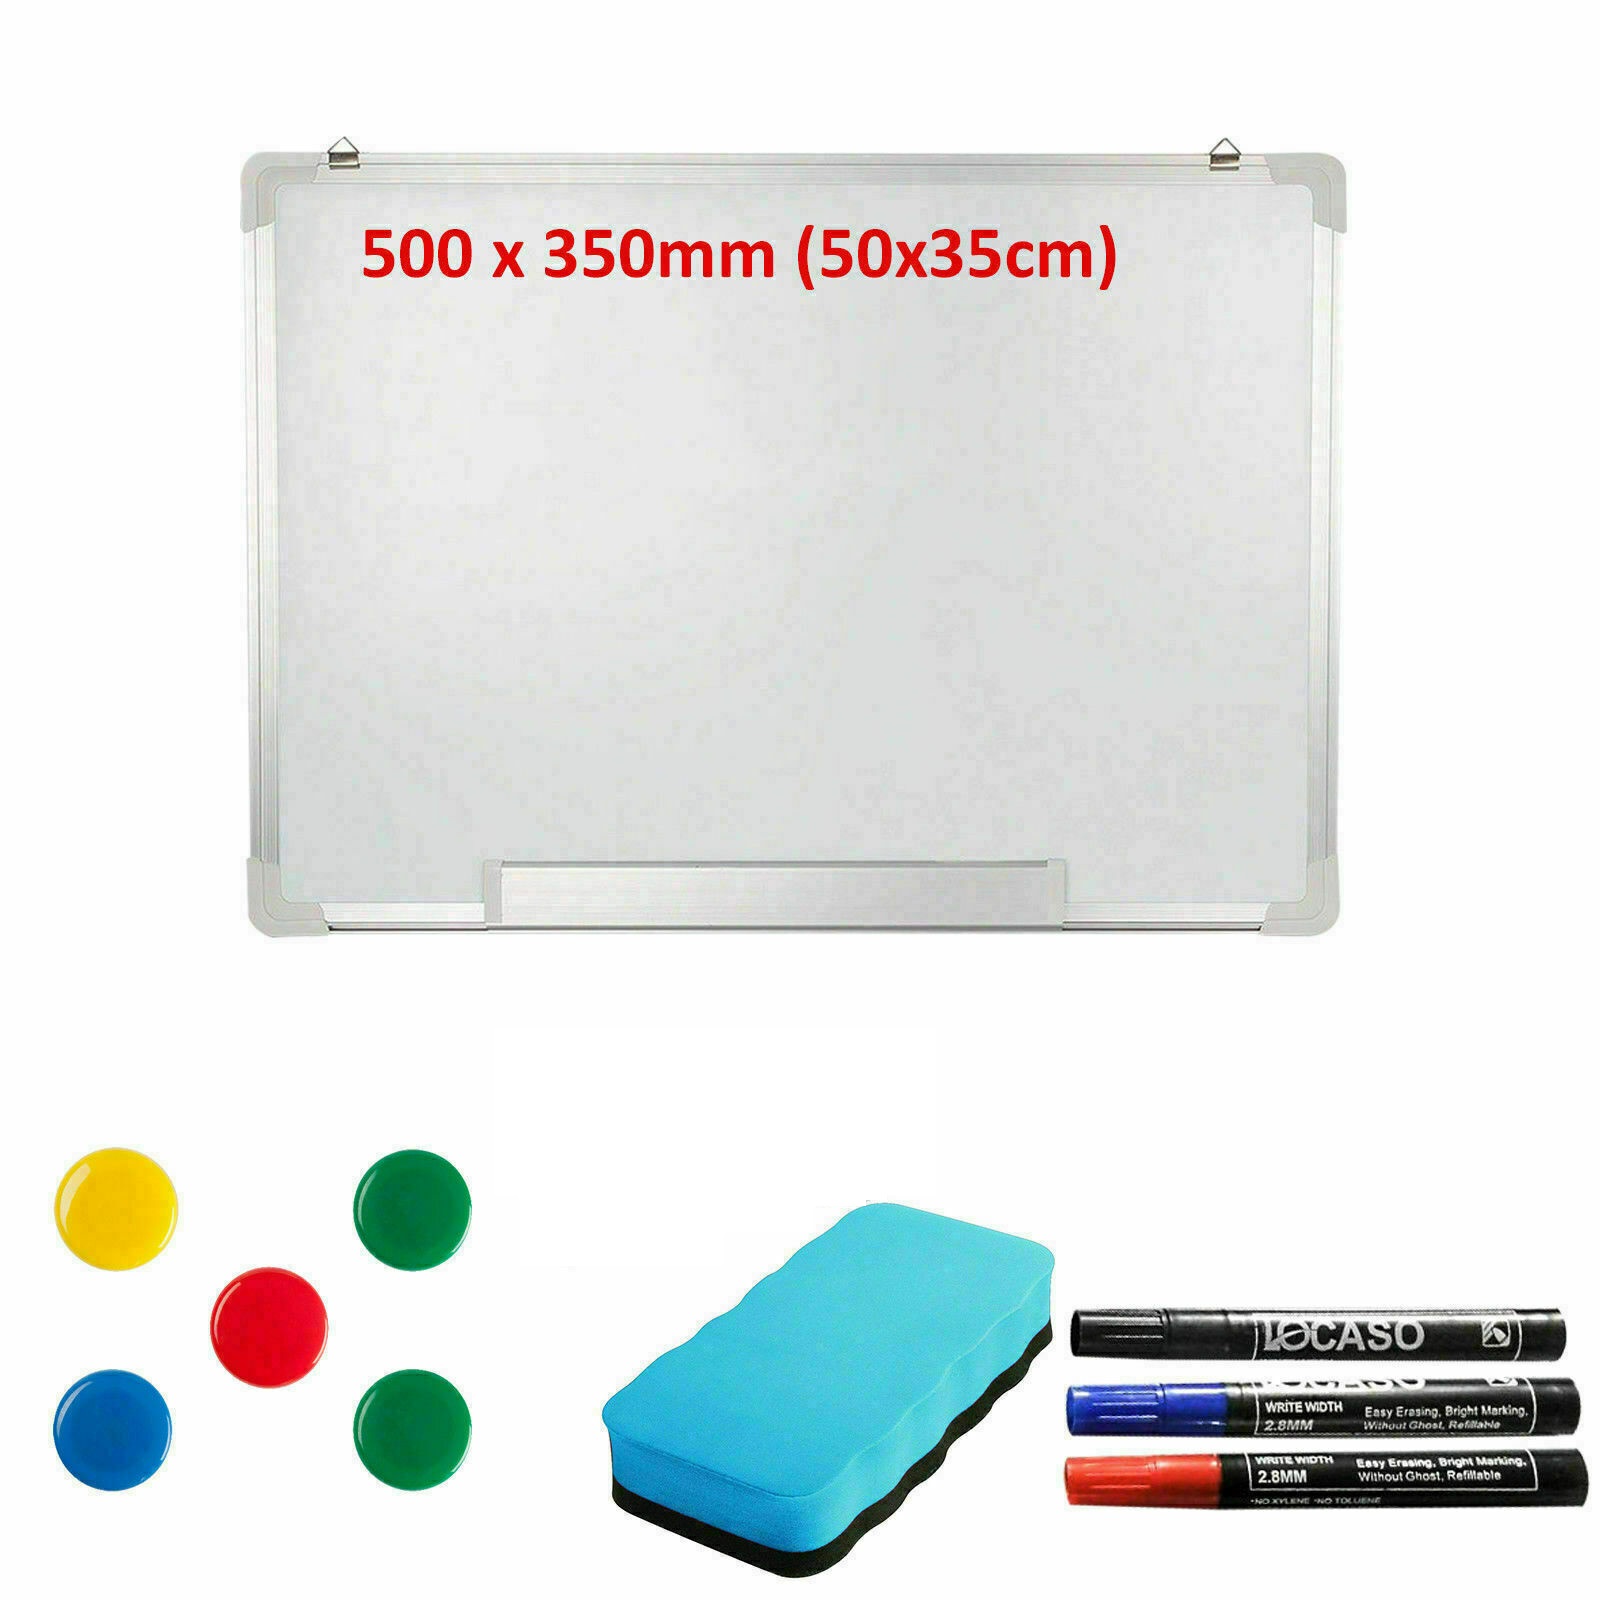 500 X 350mm Magnetic Whiteboard Small Large White Board Dry Wipe Office Home School Notice